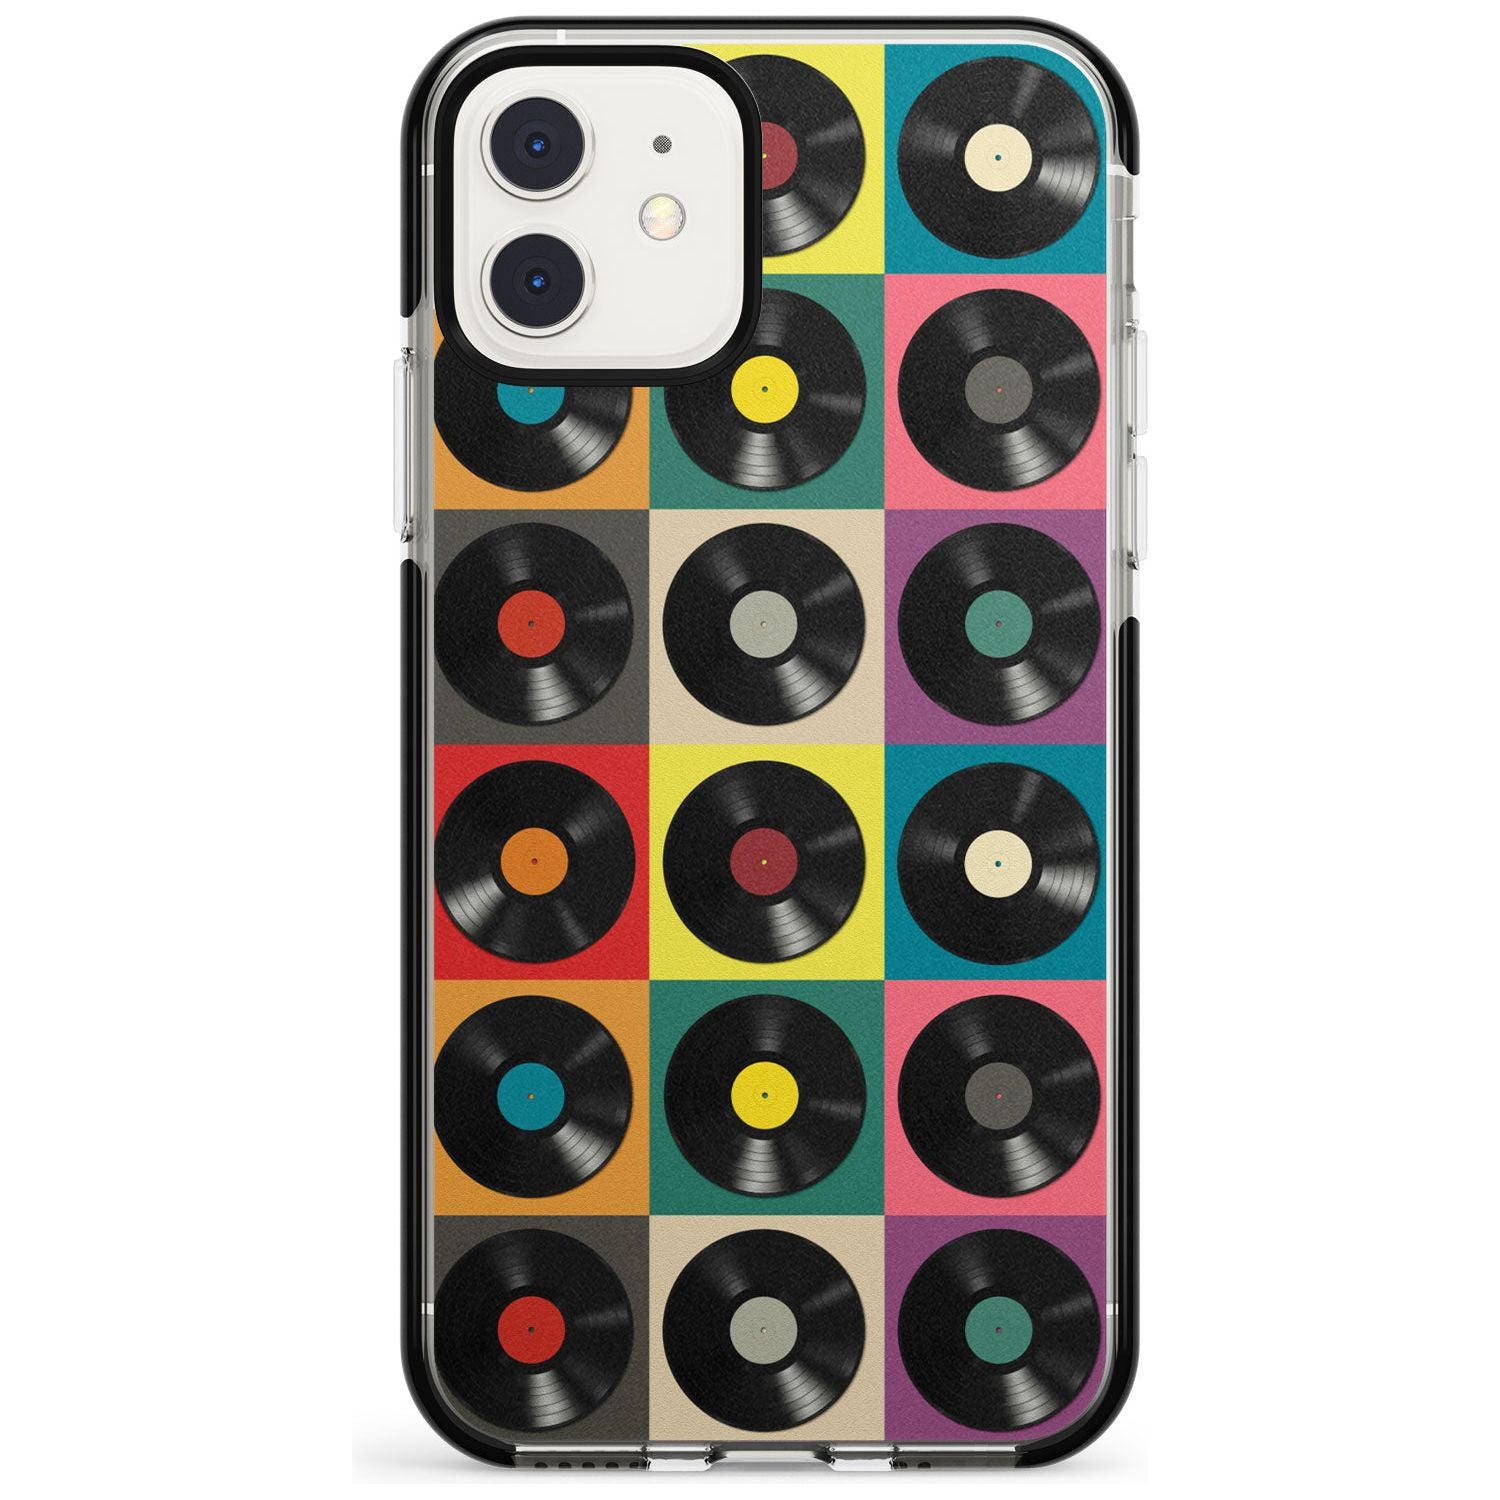 Vinyl Record Pattern Black Impact Phone Case for iPhone 11 Pro Max